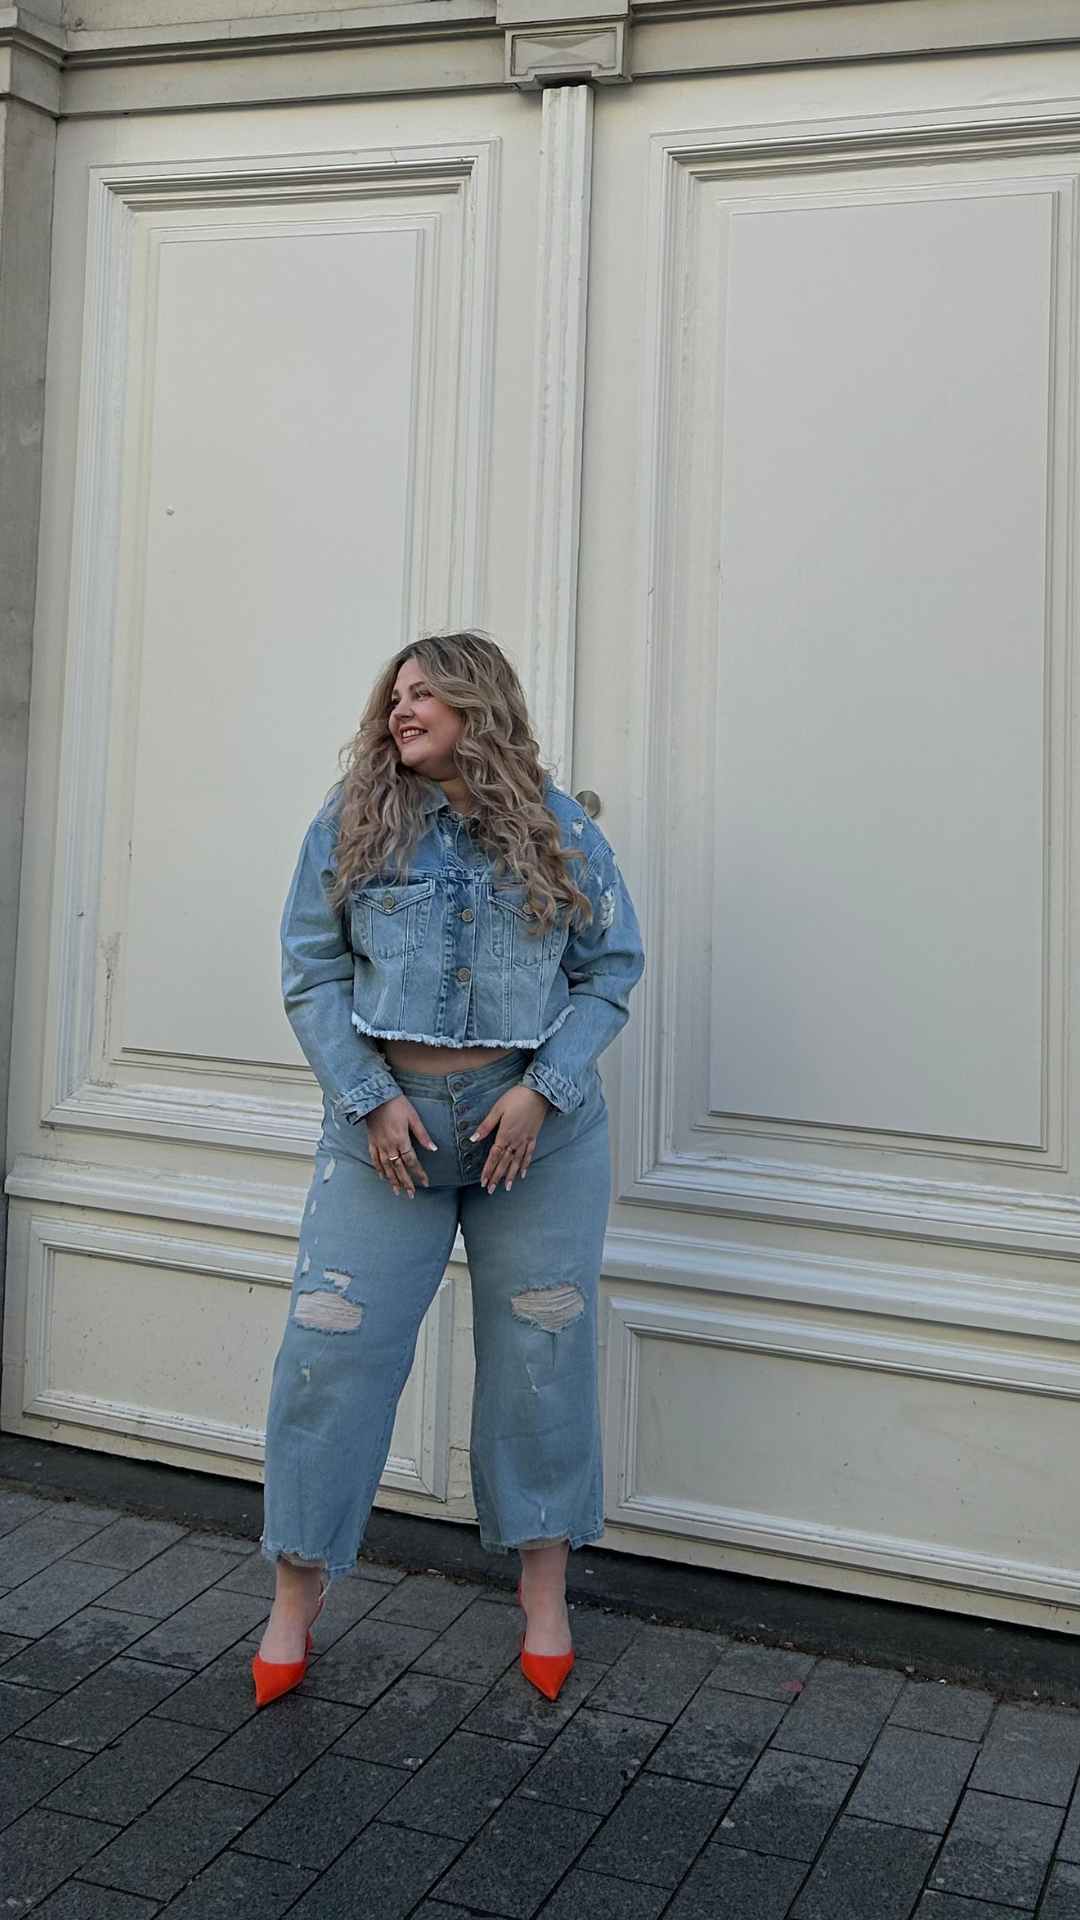 New Trend: Jeans Op Jeans